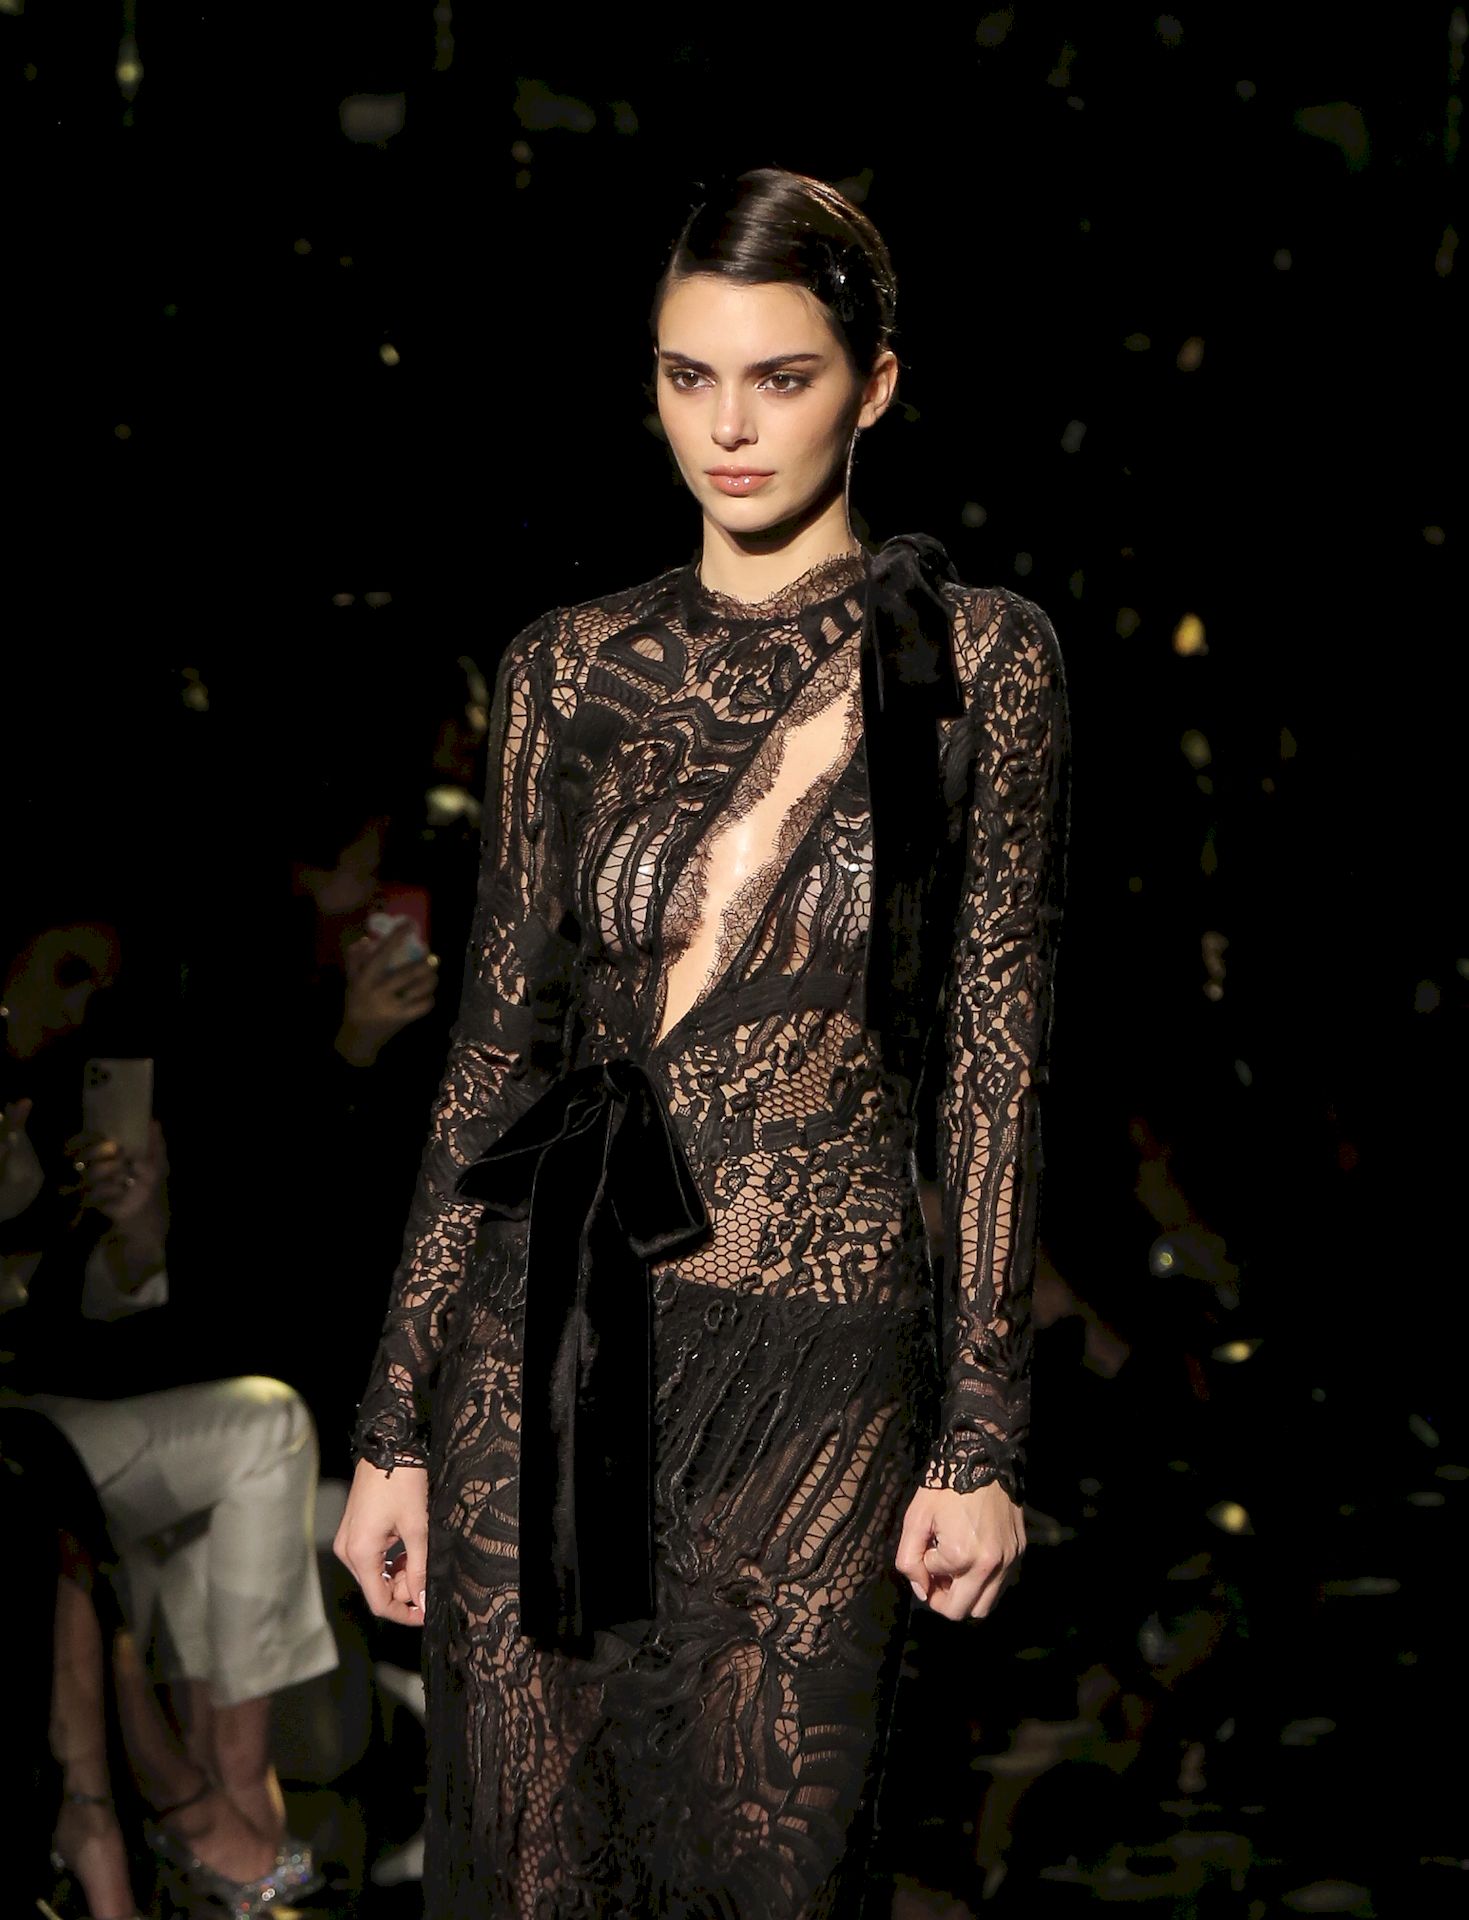 Kendall-Jenner-Walks-the-Runway-During-the-Tom-Ford-Show-0005.jpg